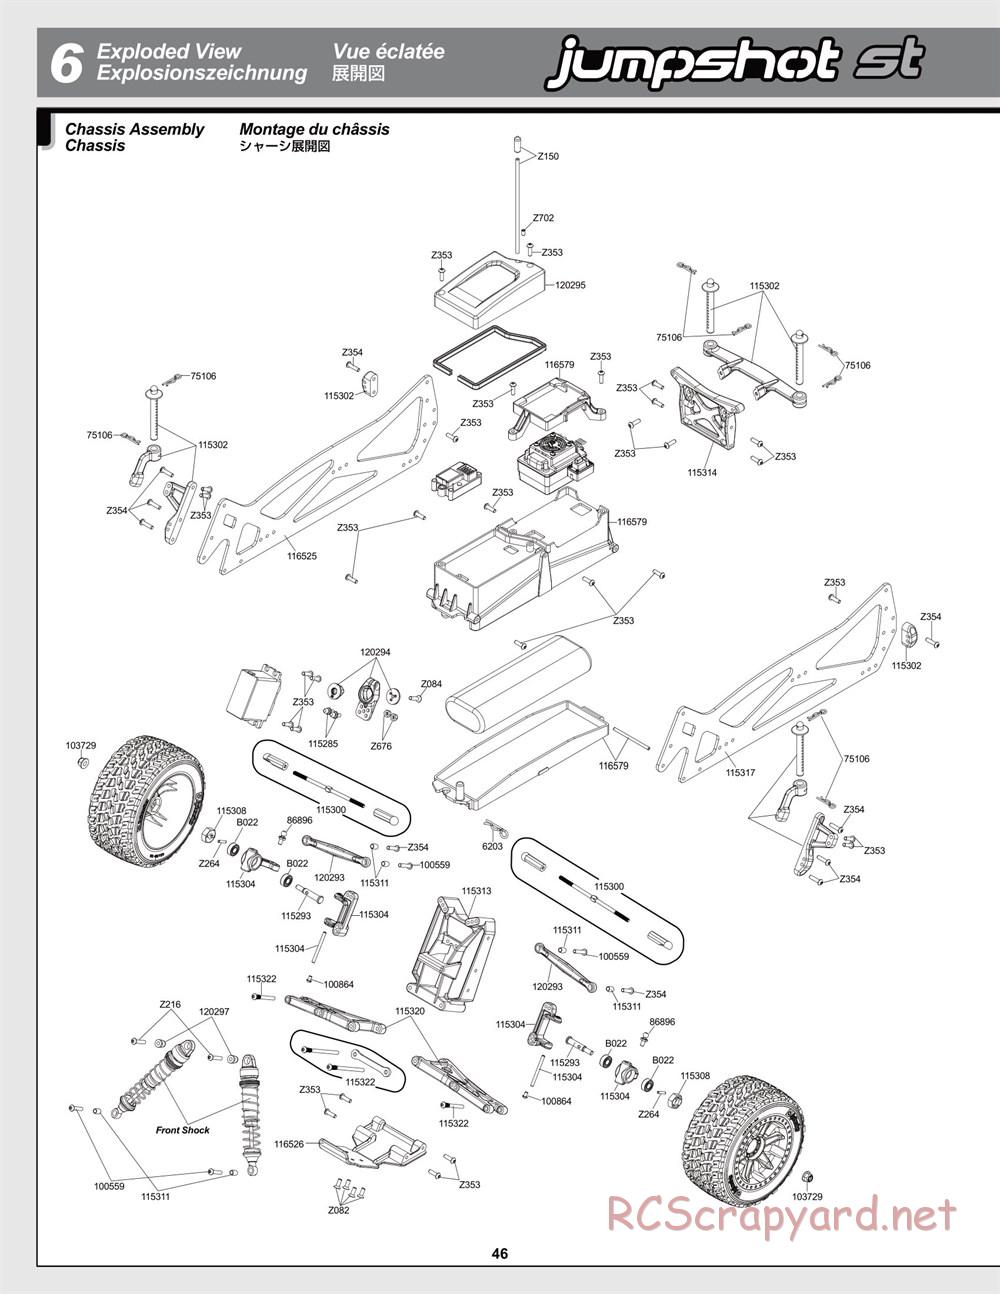 HPI - Jumpshot MT Flux - Exploded View - Page 46